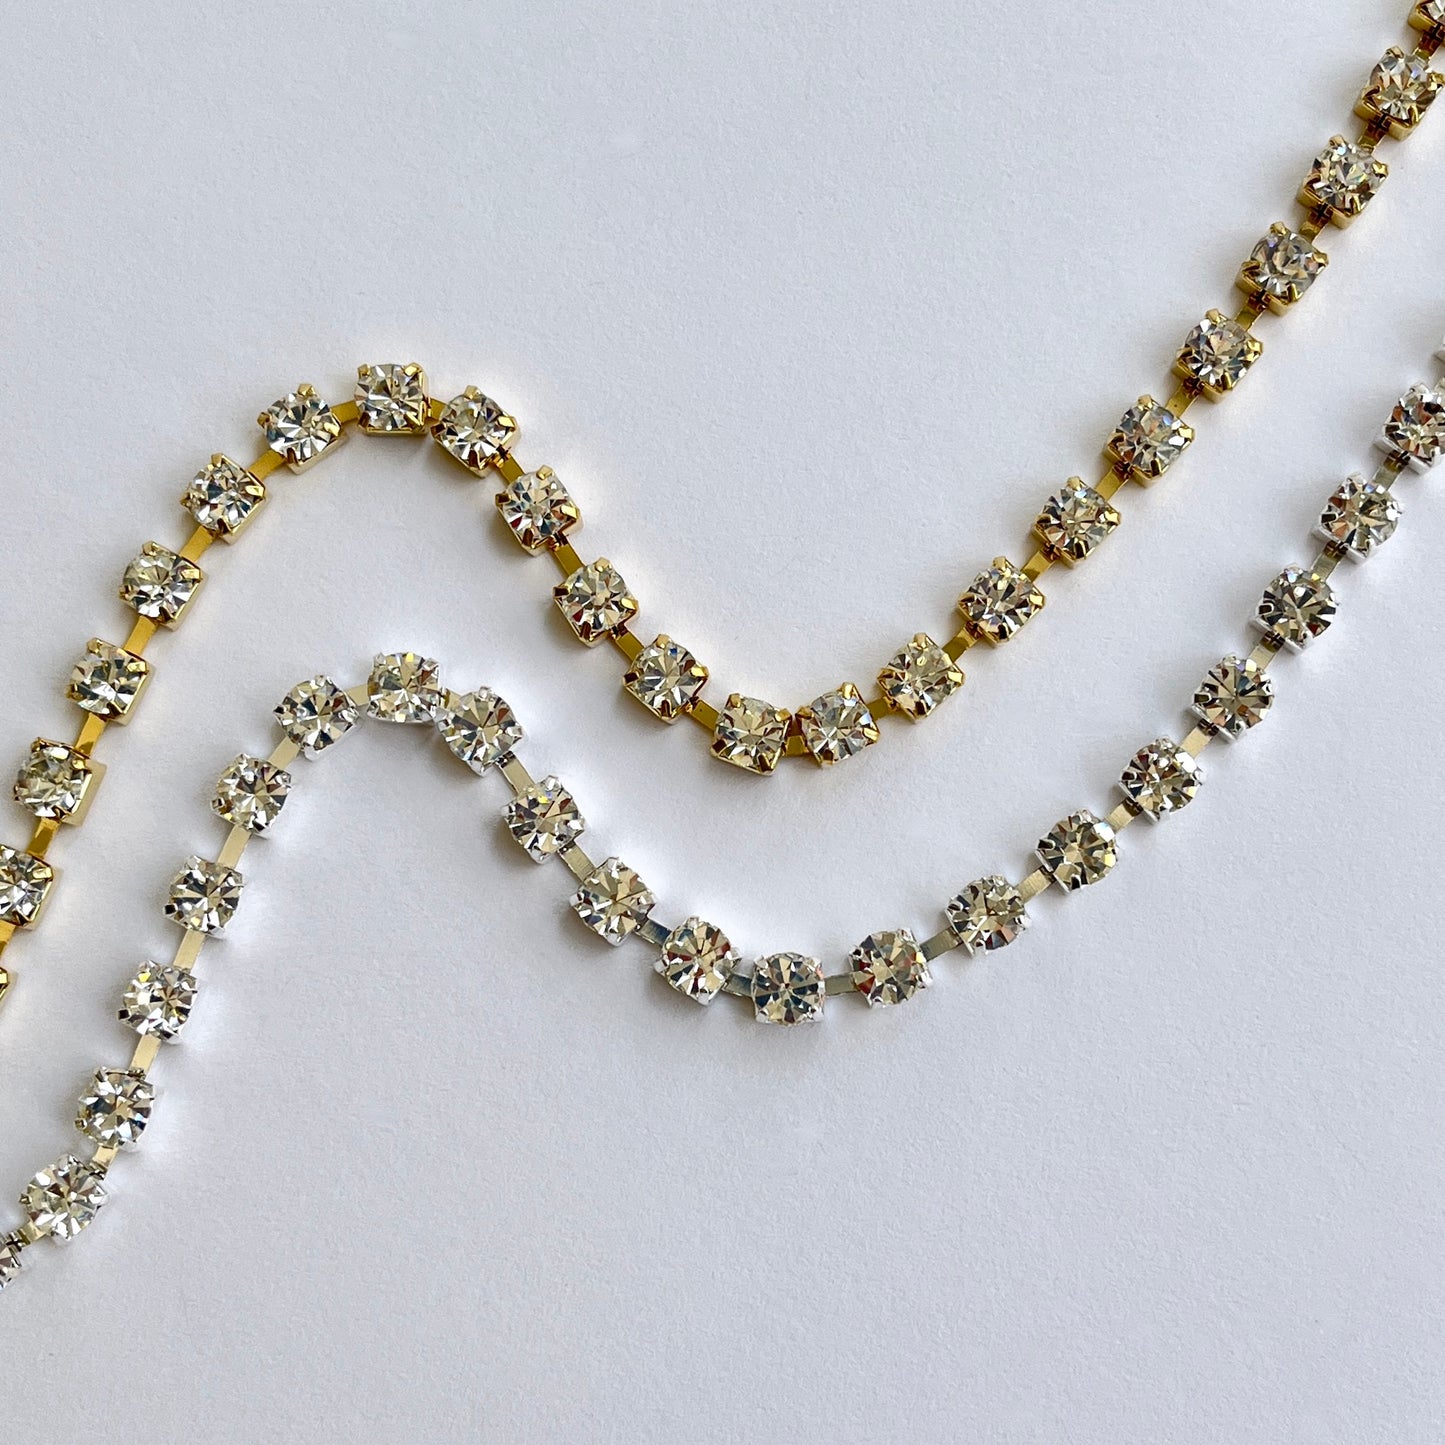 7mm Sparkly rhinestone trim in gold or silver- premium high grade diamanté crystals set in a flexible metal chain casing. Popular for bridal wear, evening wear, crafts, jewellery and headband making.